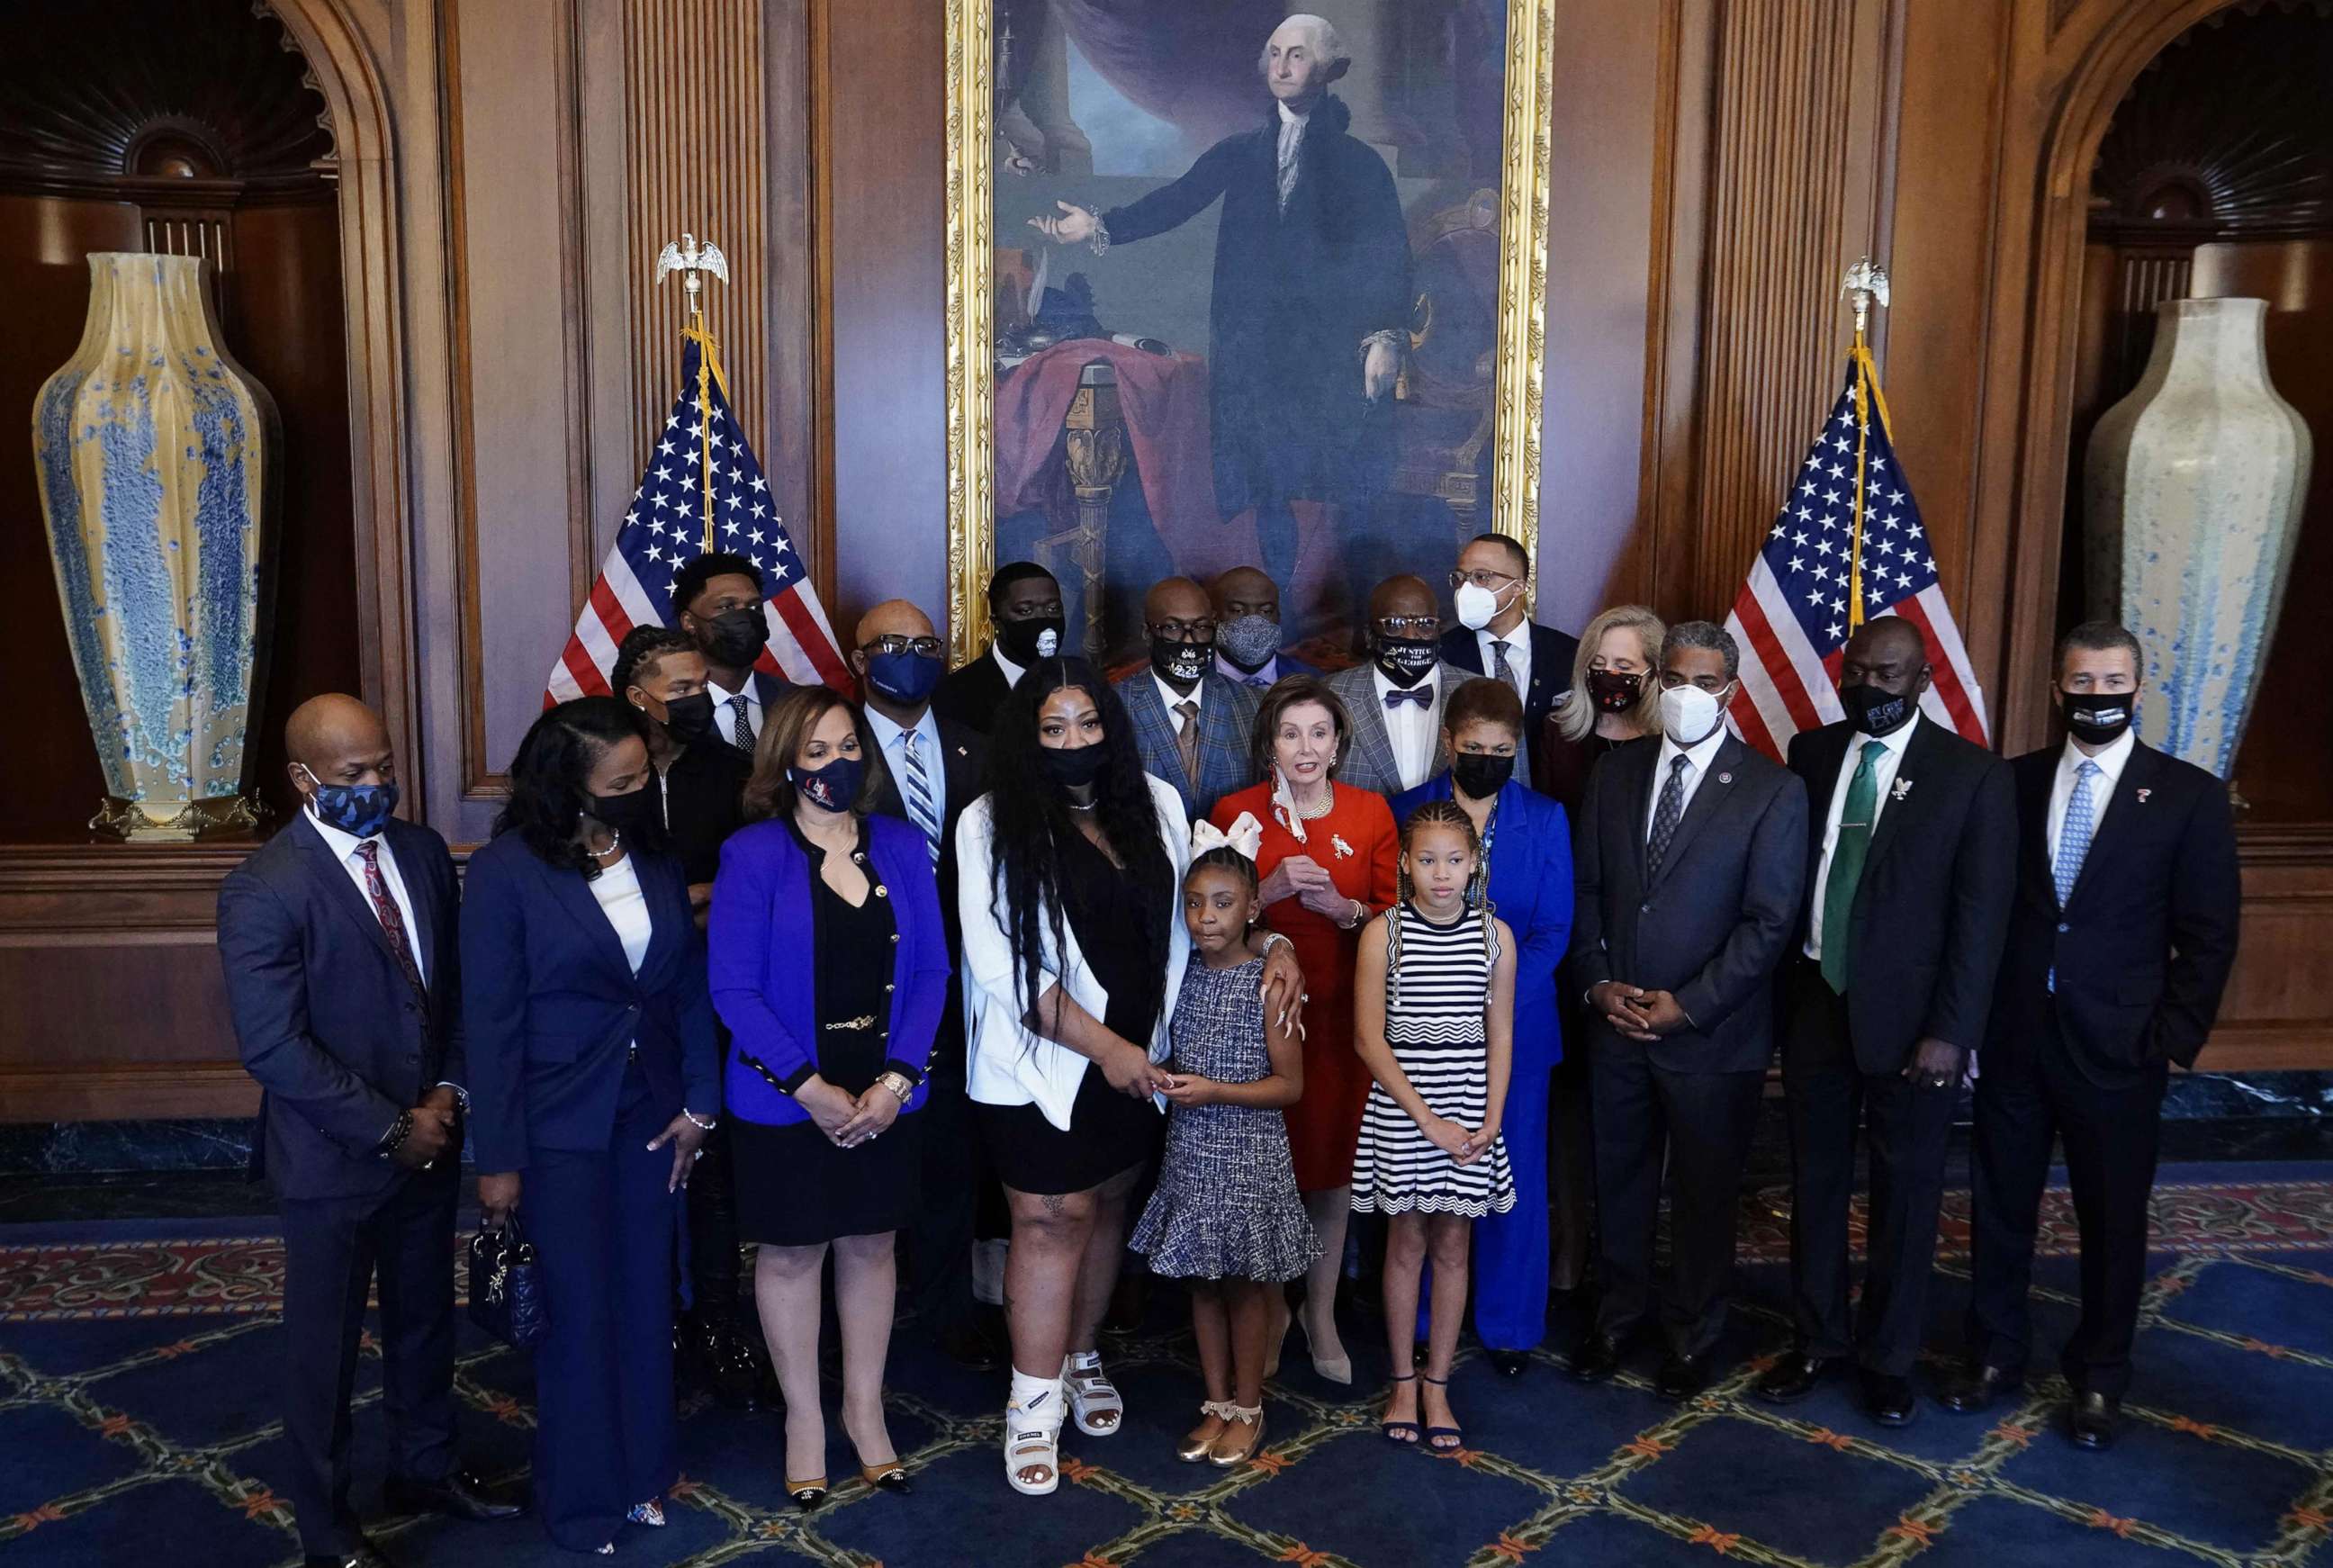 PHOTO: House Speaker Nancy Pelosi speaks to reporters while standing with members of the Floyd family prior to a meeting to mark the anniversary of the death of George Floyd at the US Capitol in Washington on May 25, 2021.